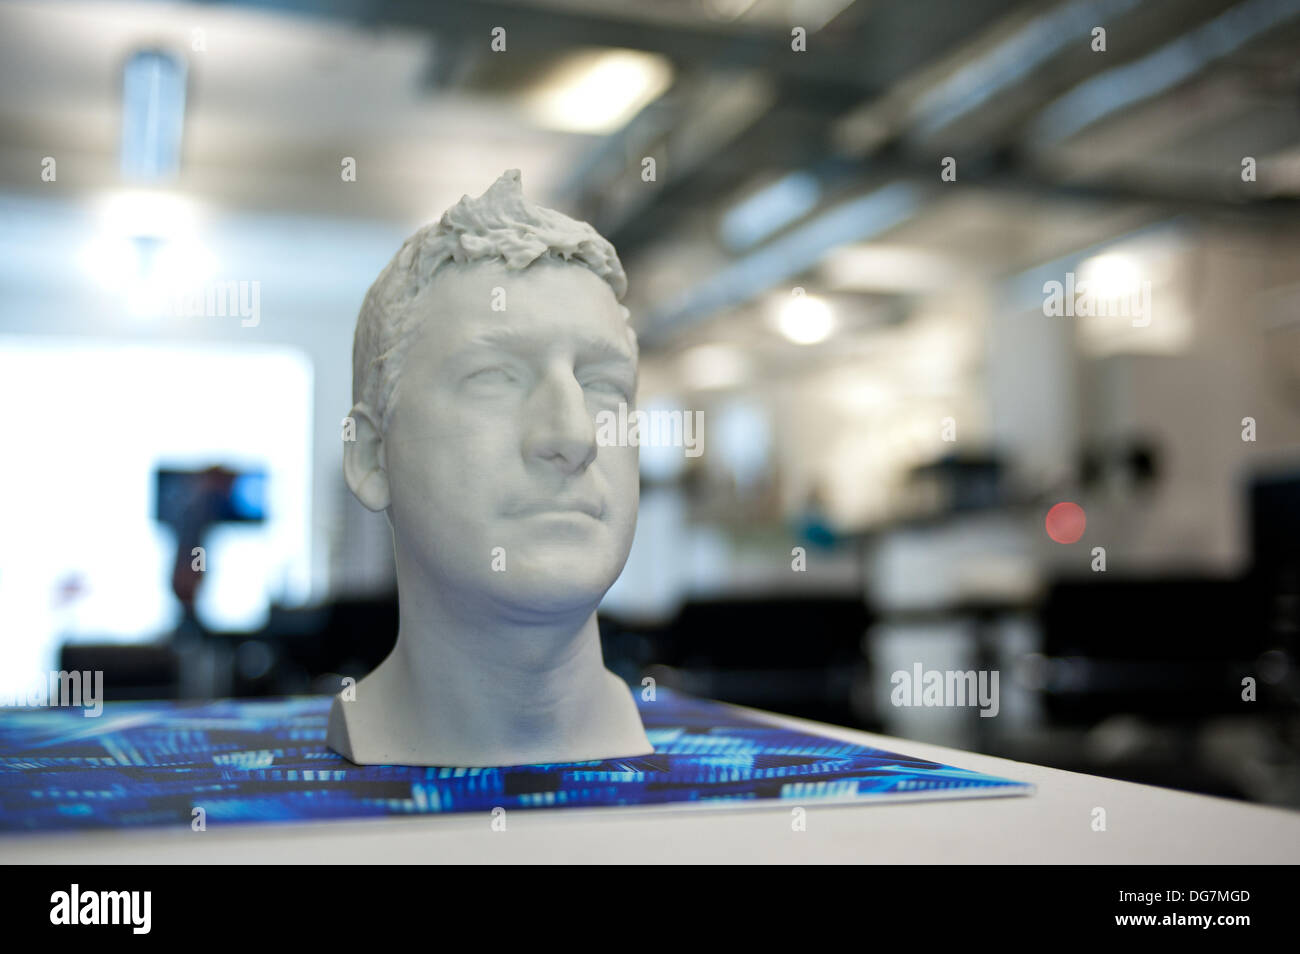 London, UK – 9 October 2013: a 3D printed head is displayed at the Inition, Everything in 3D demo studio in Shoreditch, East London. Stock Photo